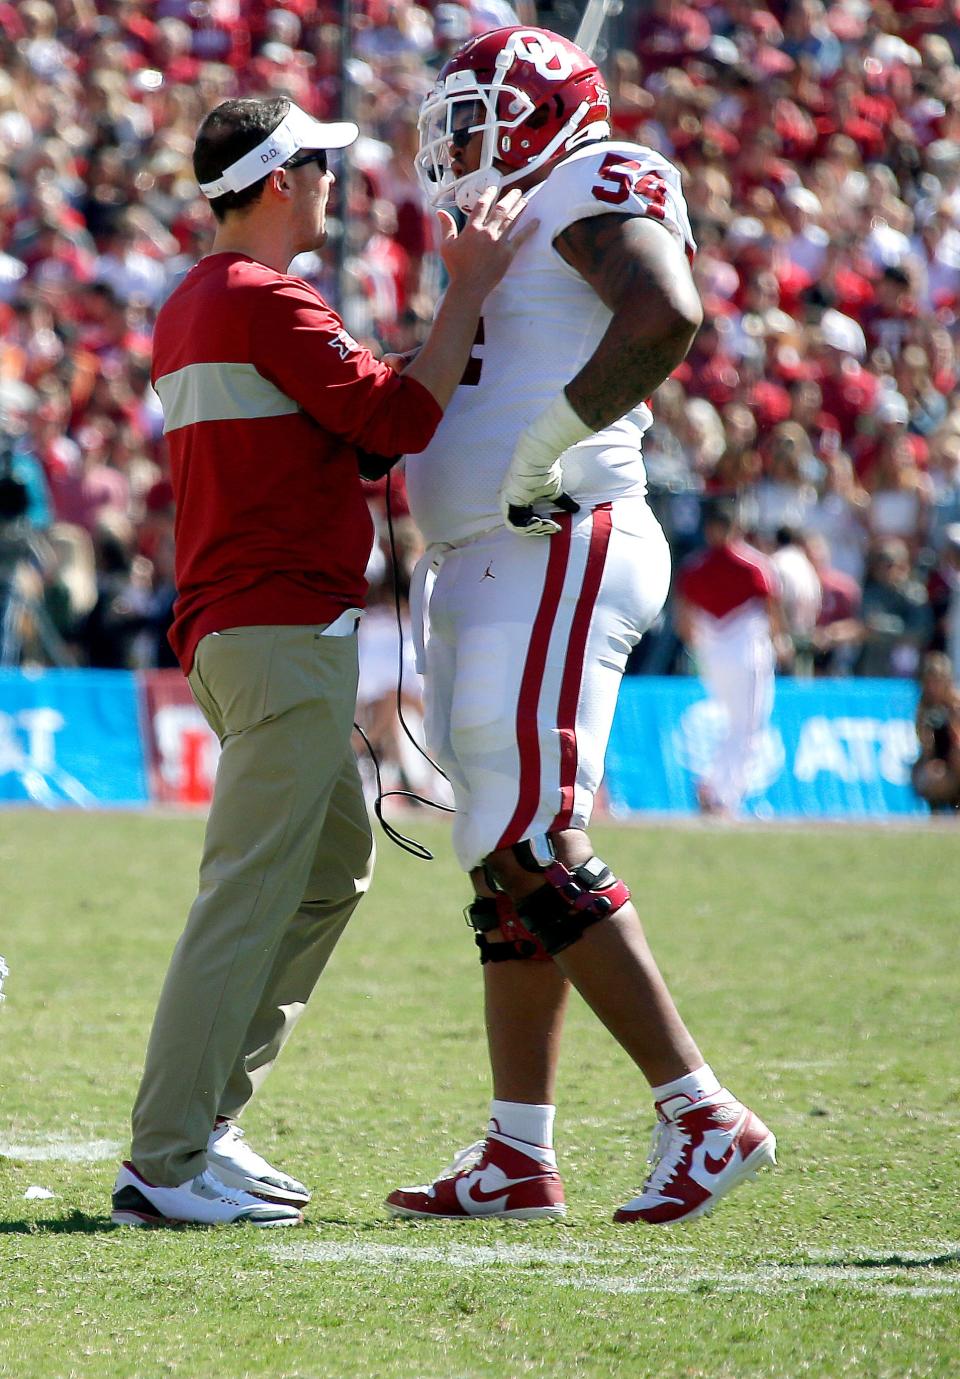 Oklahoma head coach Lincoln Riley talks with Marquis Hayes (54) in the fourth quarter during the Red River Showdown college football game between the University of Oklahoma Sooners (OU) and the Texas Longhorns (UT) at Cotton Bowl Stadium in Dallas, Saturday, Oct. 12, 2019. OU won 34-27.